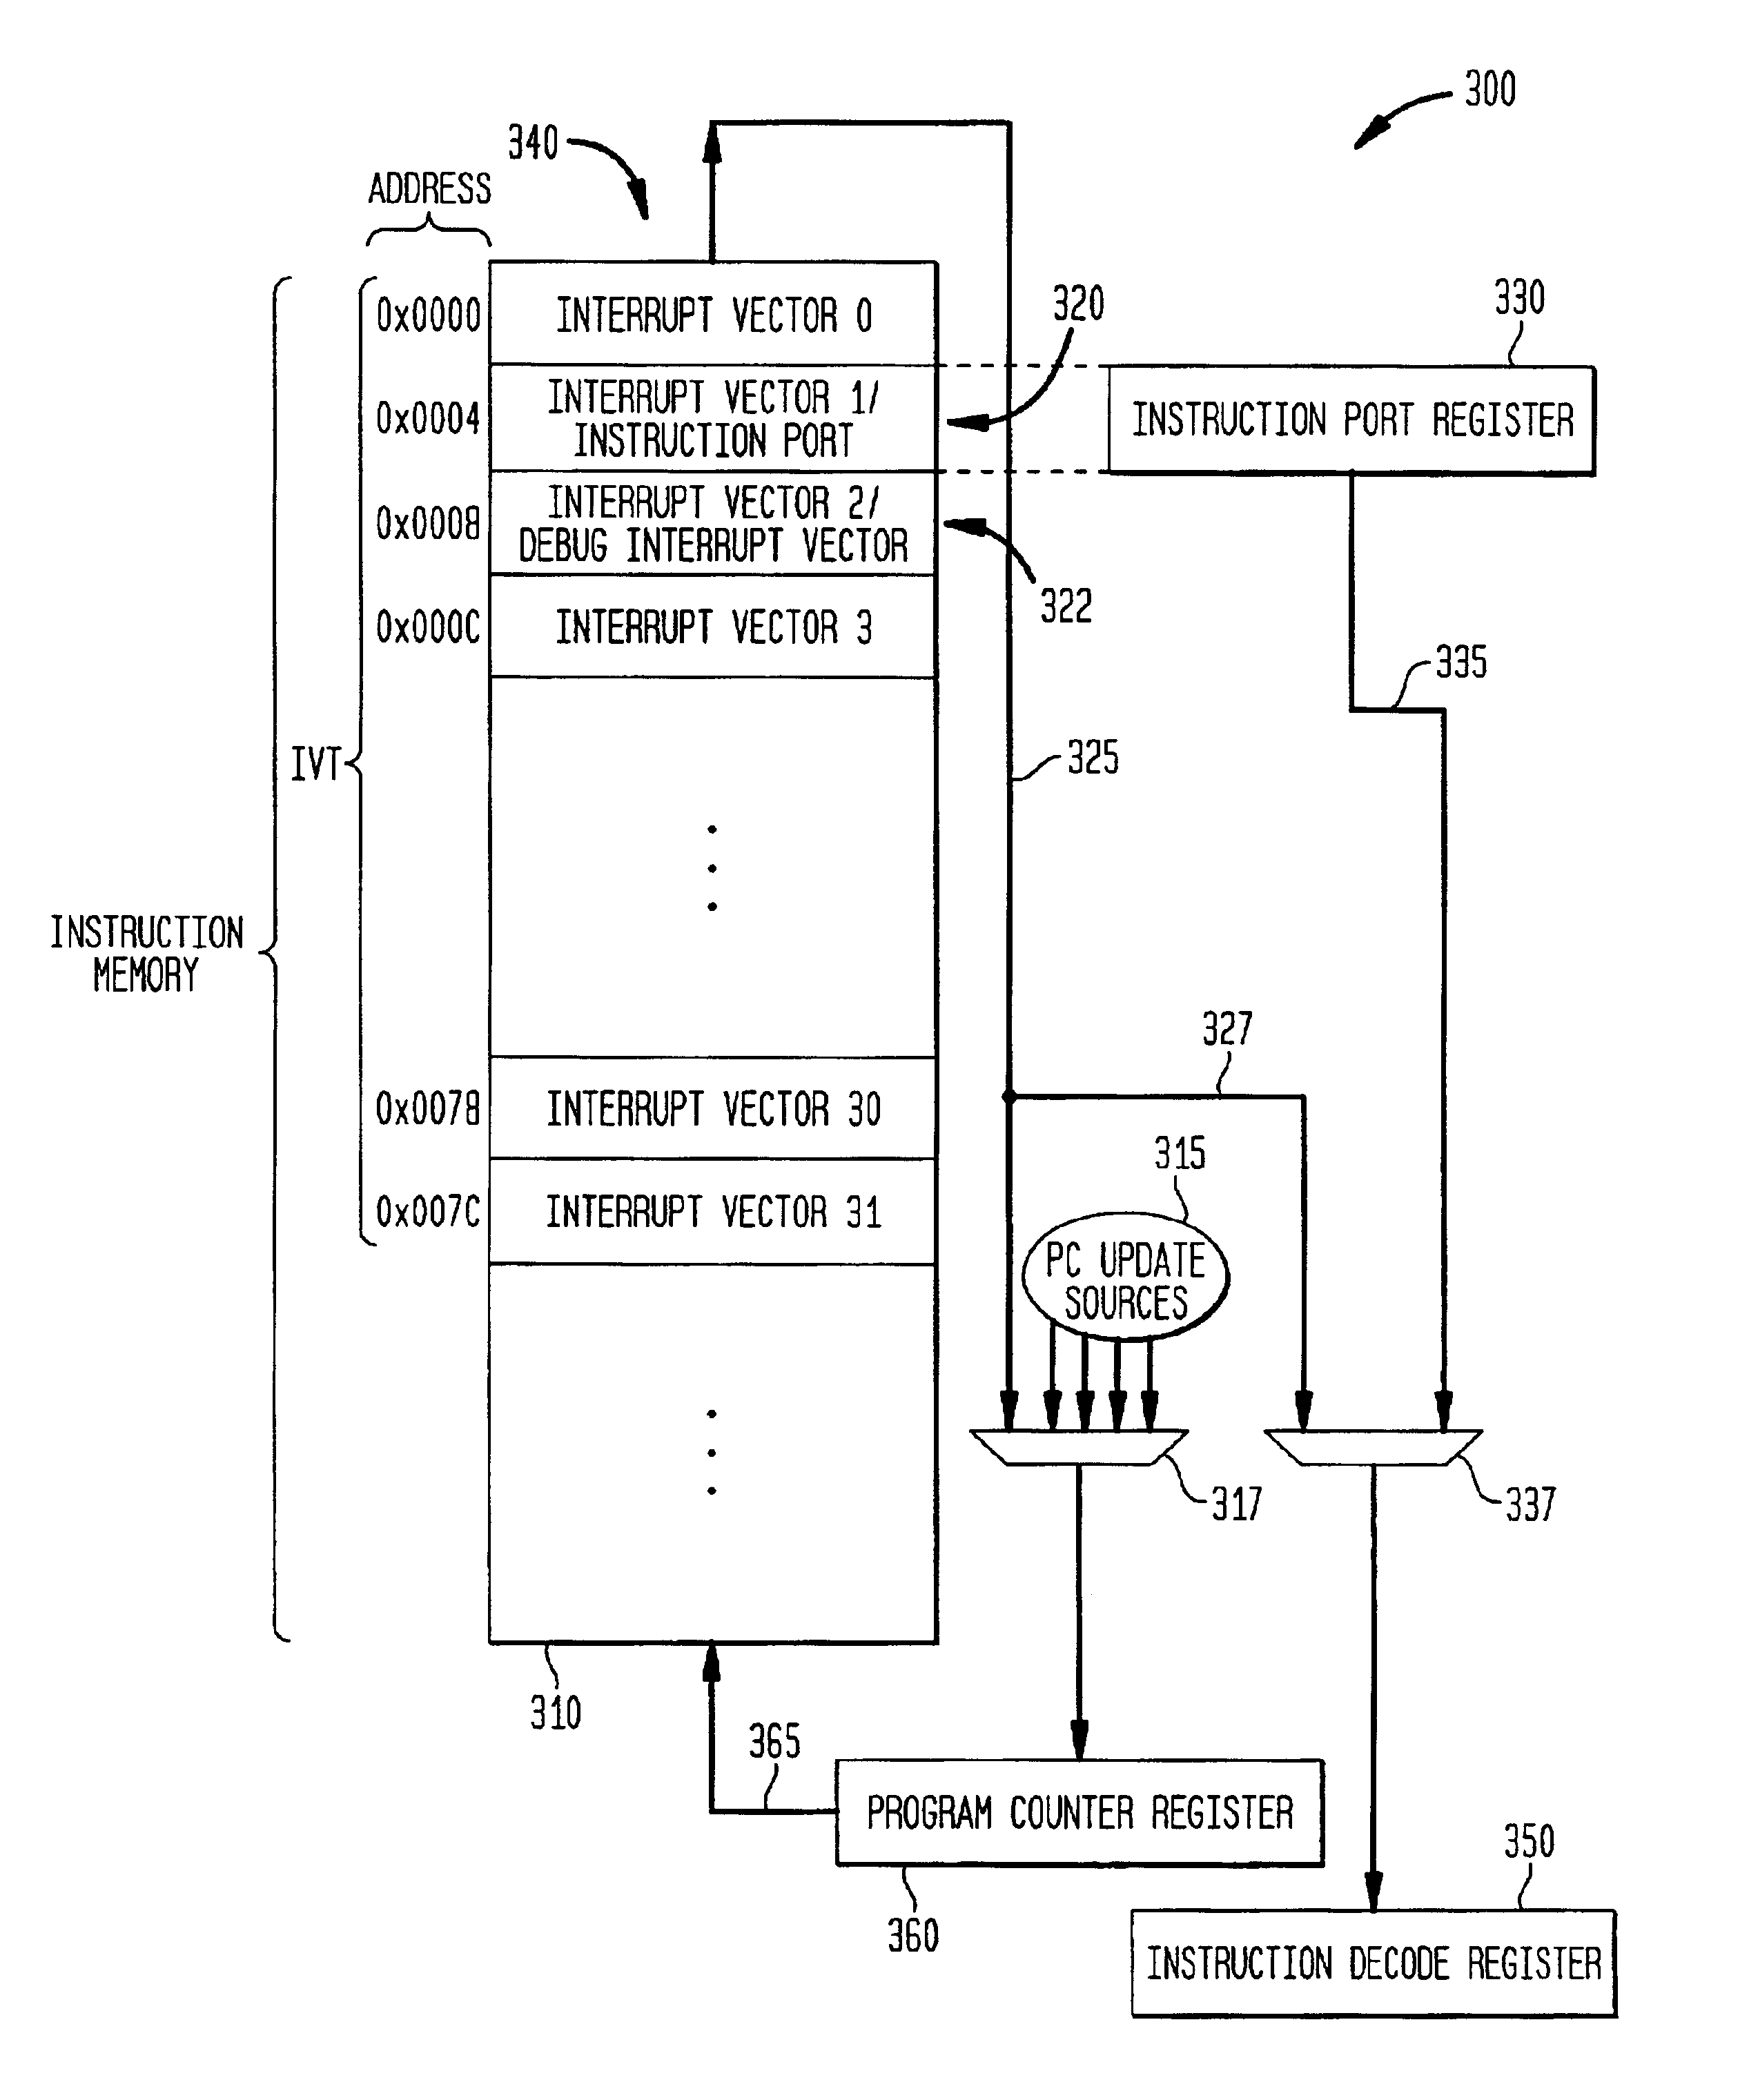 Control processor dynamically loading shadow instruction register associated with memory entry of coprocessor in flexible coupling mode